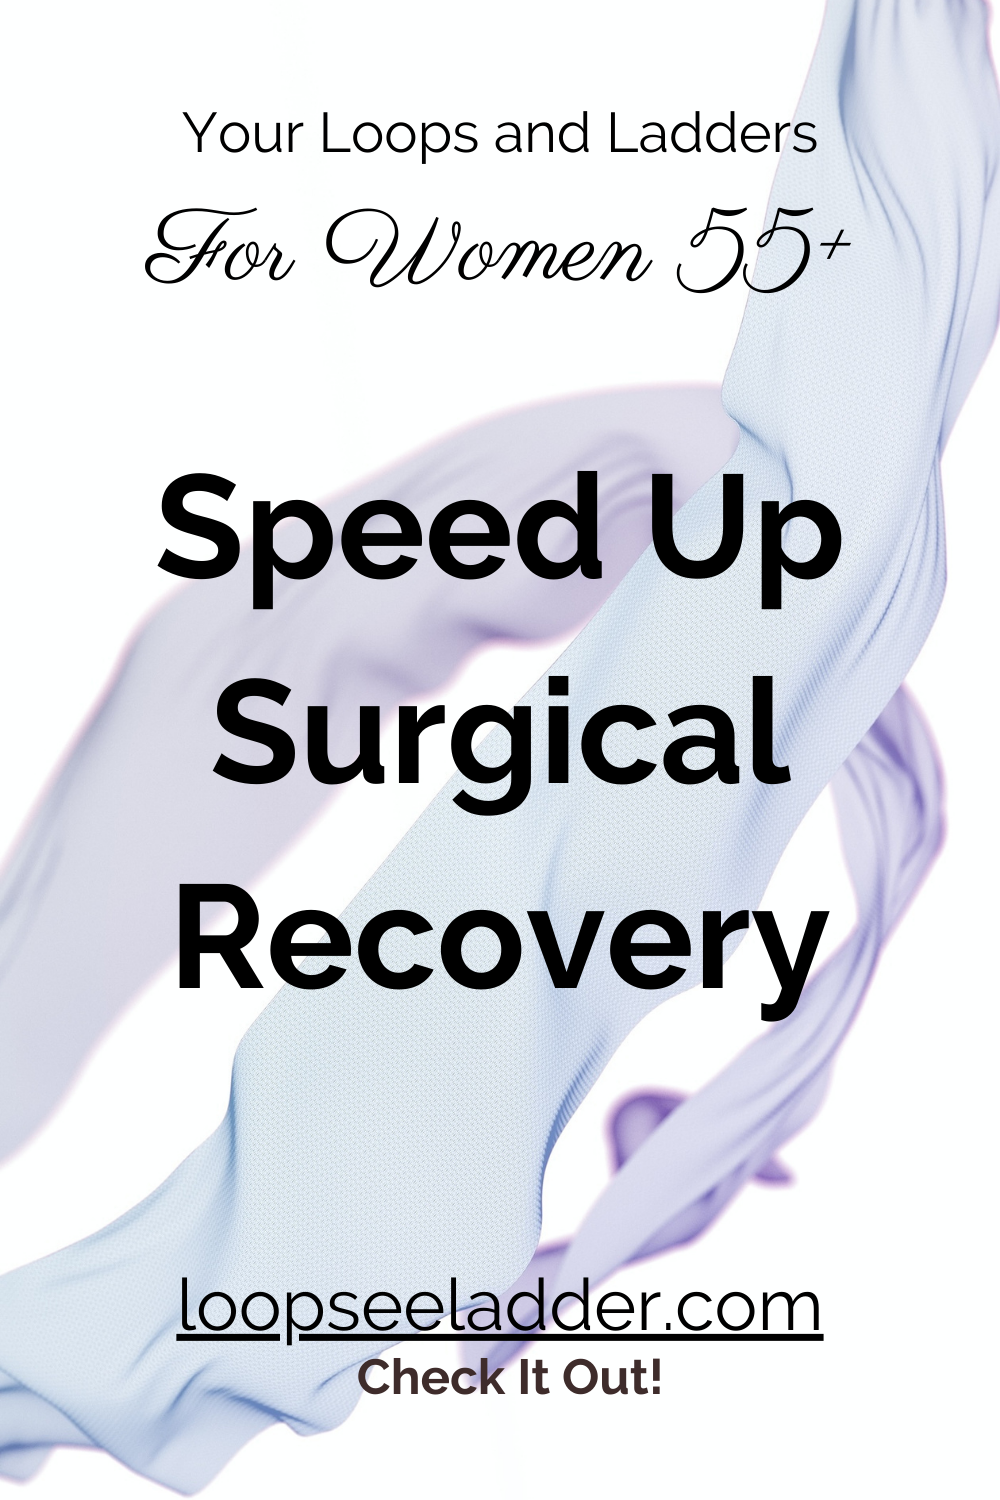 7 Surprising Ways Women 55+ Can Speed Up Surgery Recovery